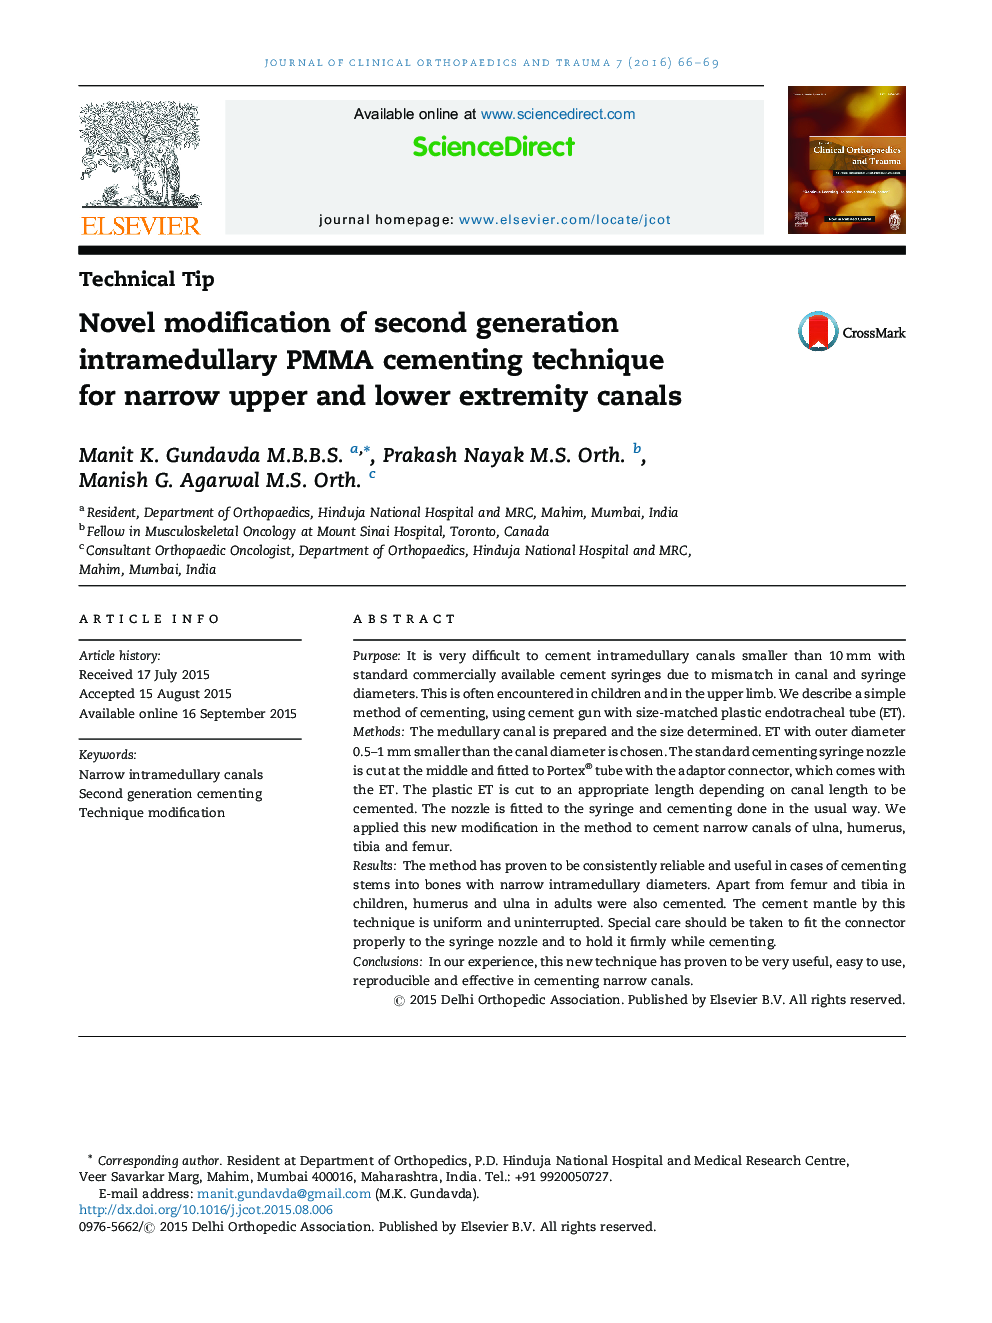 Novel modification of second generation intramedullary PMMA cementing technique for narrow upper and lower extremity canals